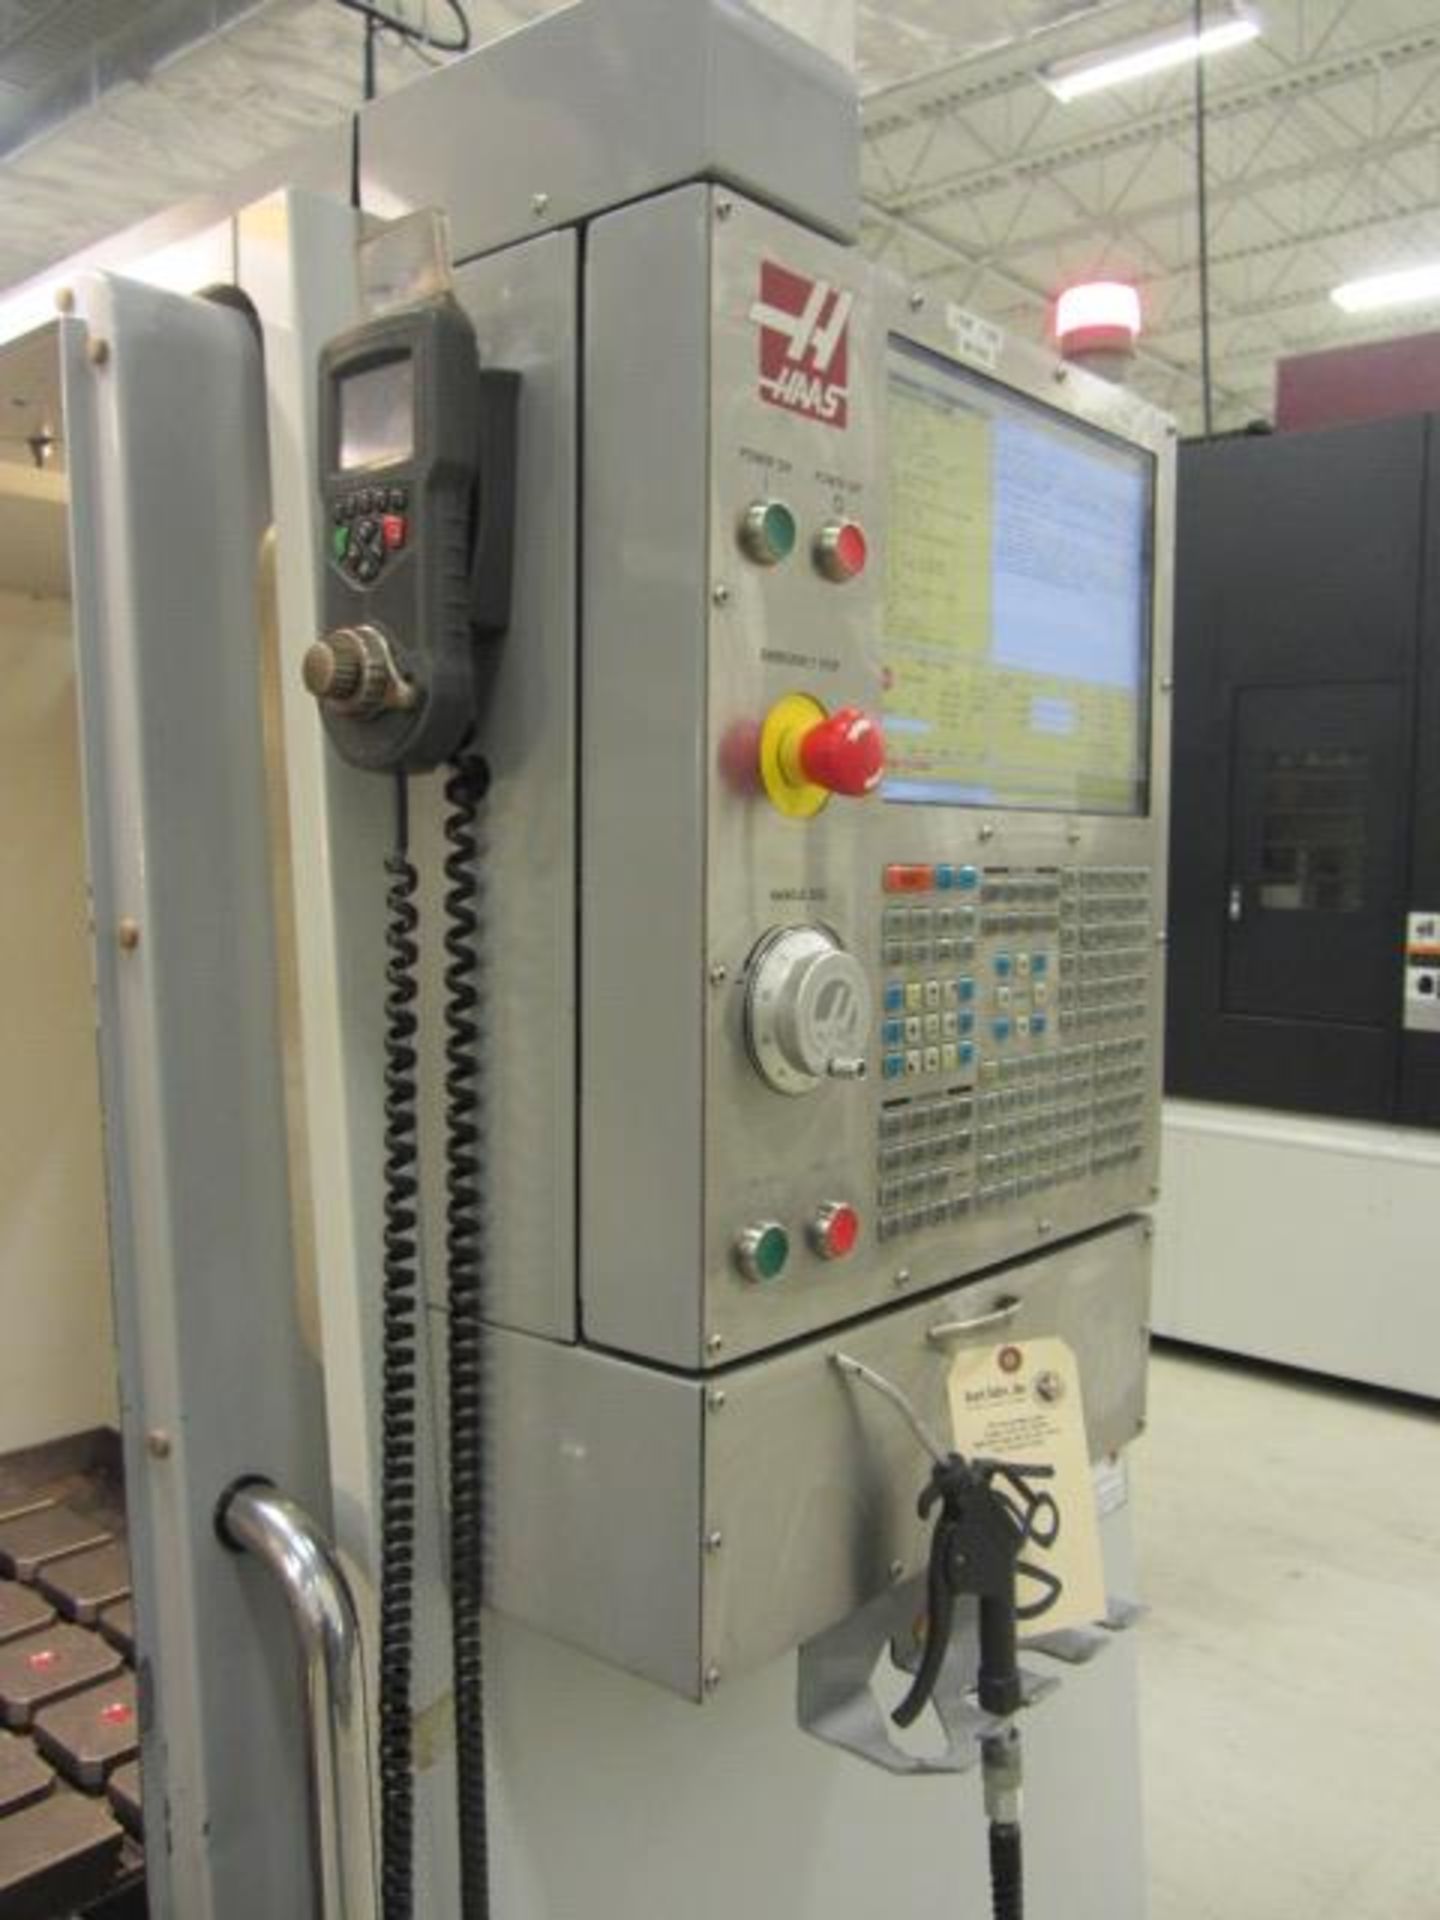 Haas VM-3 Mold Maker CNC Vertical Machining Center with 54'' x 24'' Table, #40 Taper Spindle - Image 6 of 10